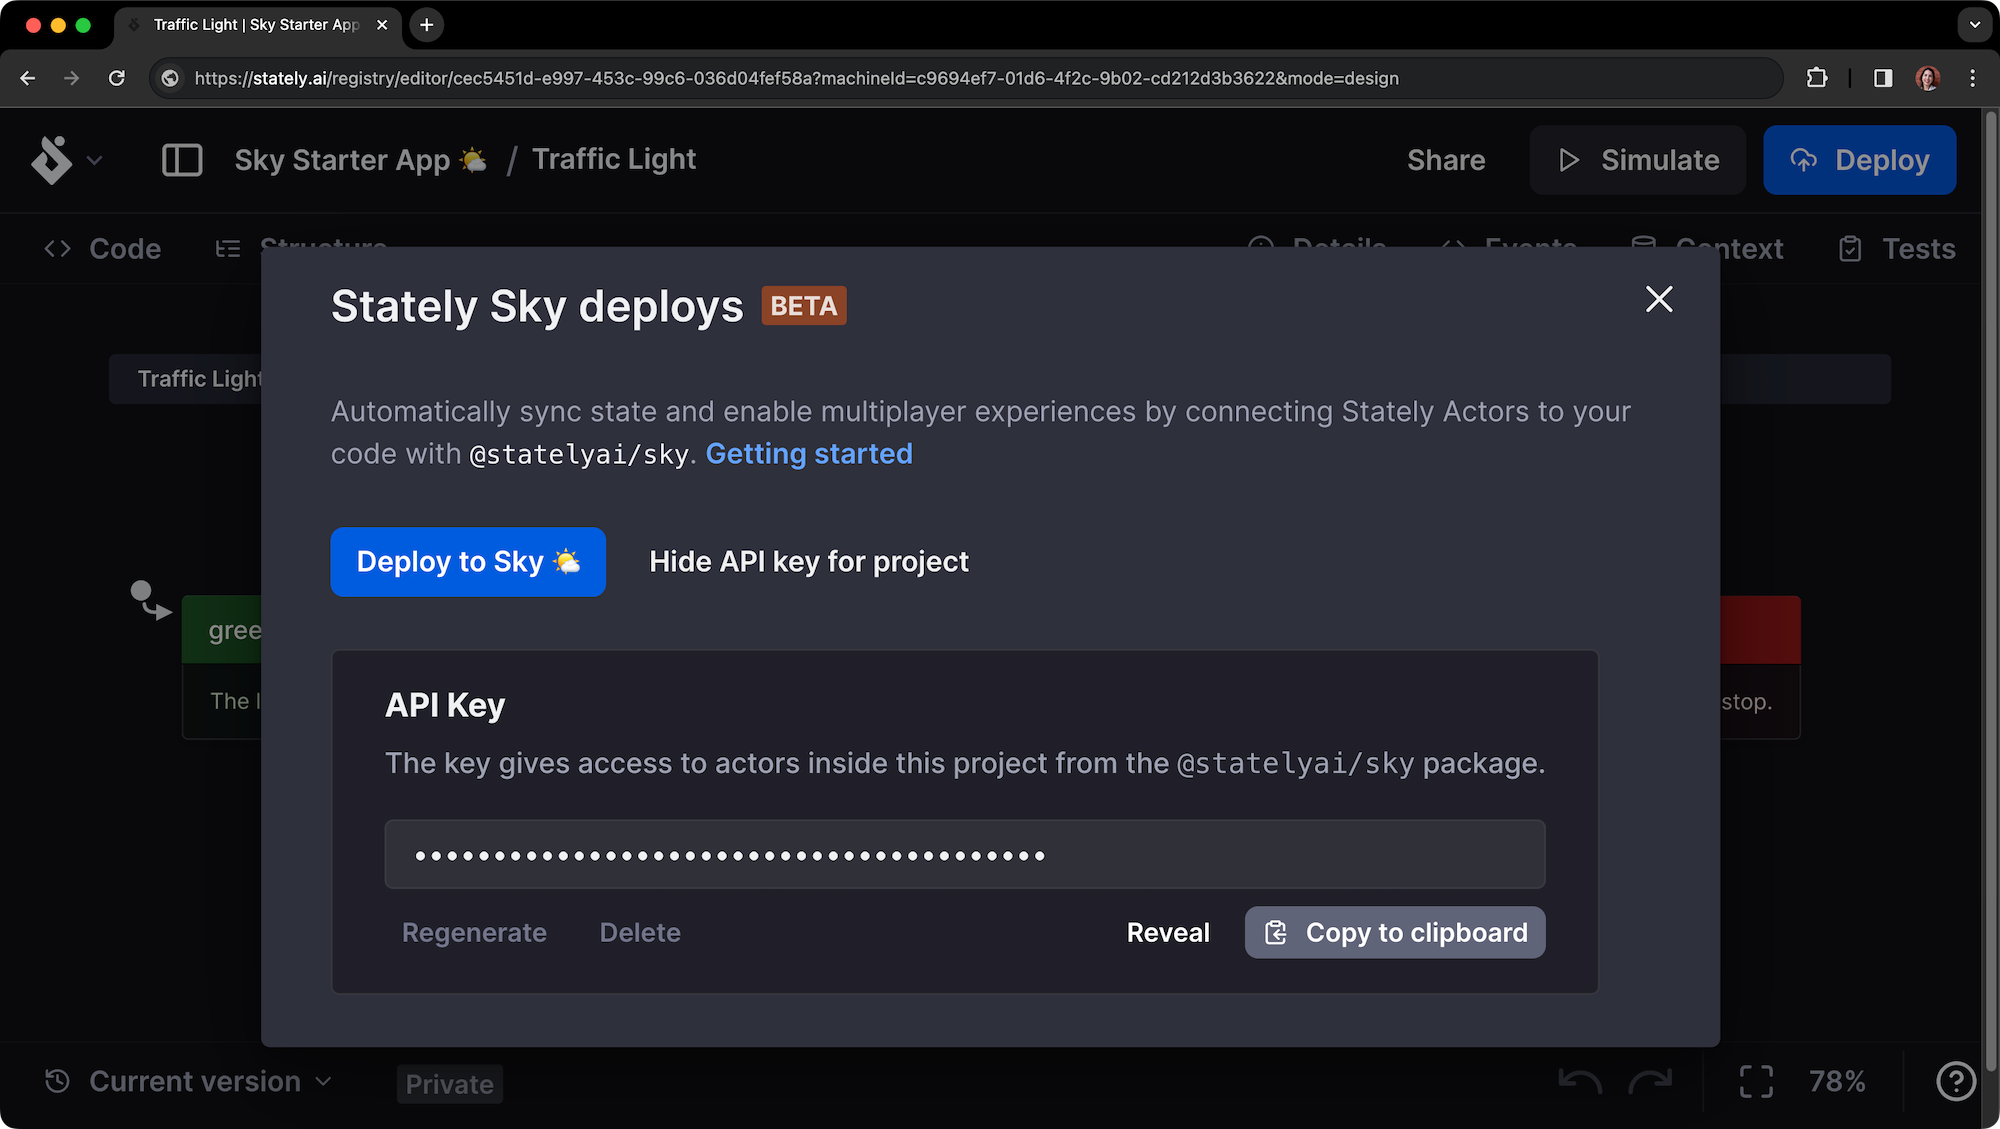 Stately Sky modal shows the API key in an input hidden behind password dots. There are options to Regenerate, Delete, Reveal, or copy the API key to the clipboard.